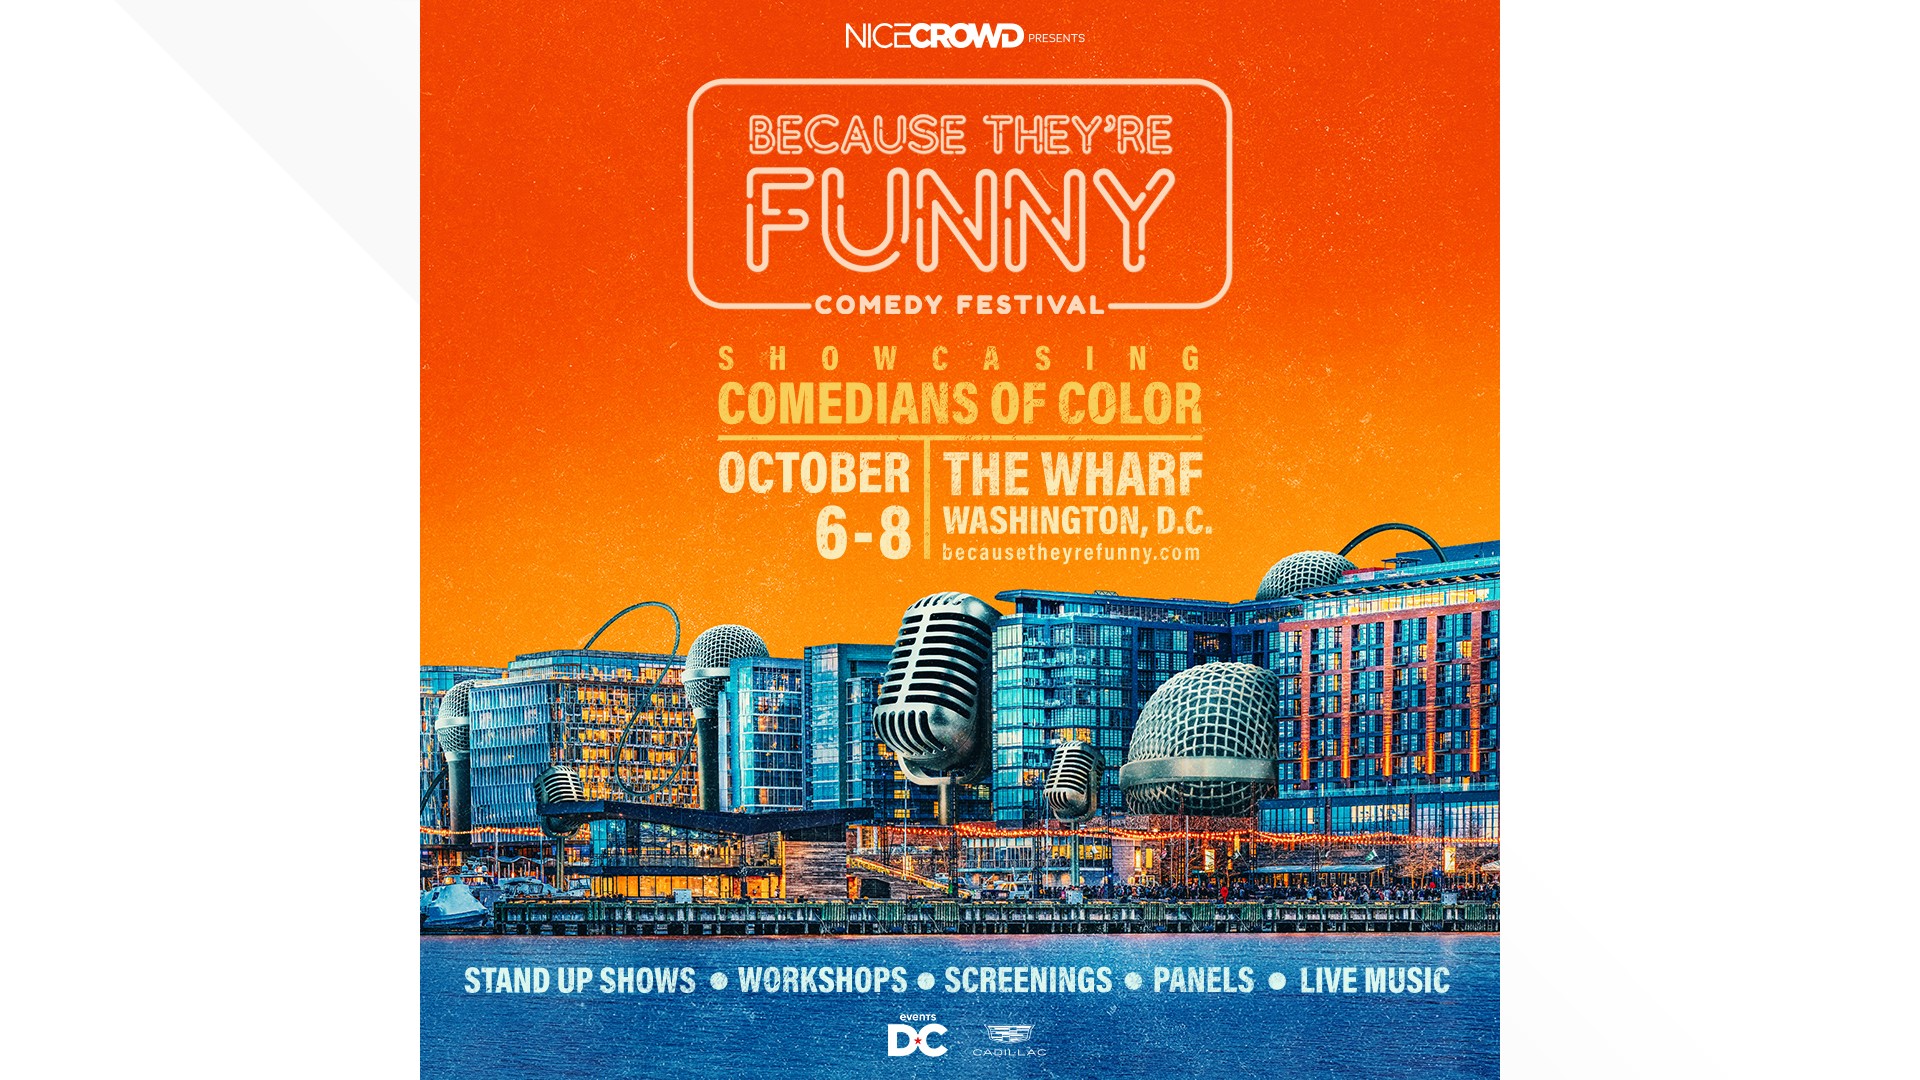 The first ever "Because They're Funny" Comedy Festival is happening at The Wharf in DC 10/6-10/8. We spoke to the co-founders Jeff and Nicole Friday about the event.